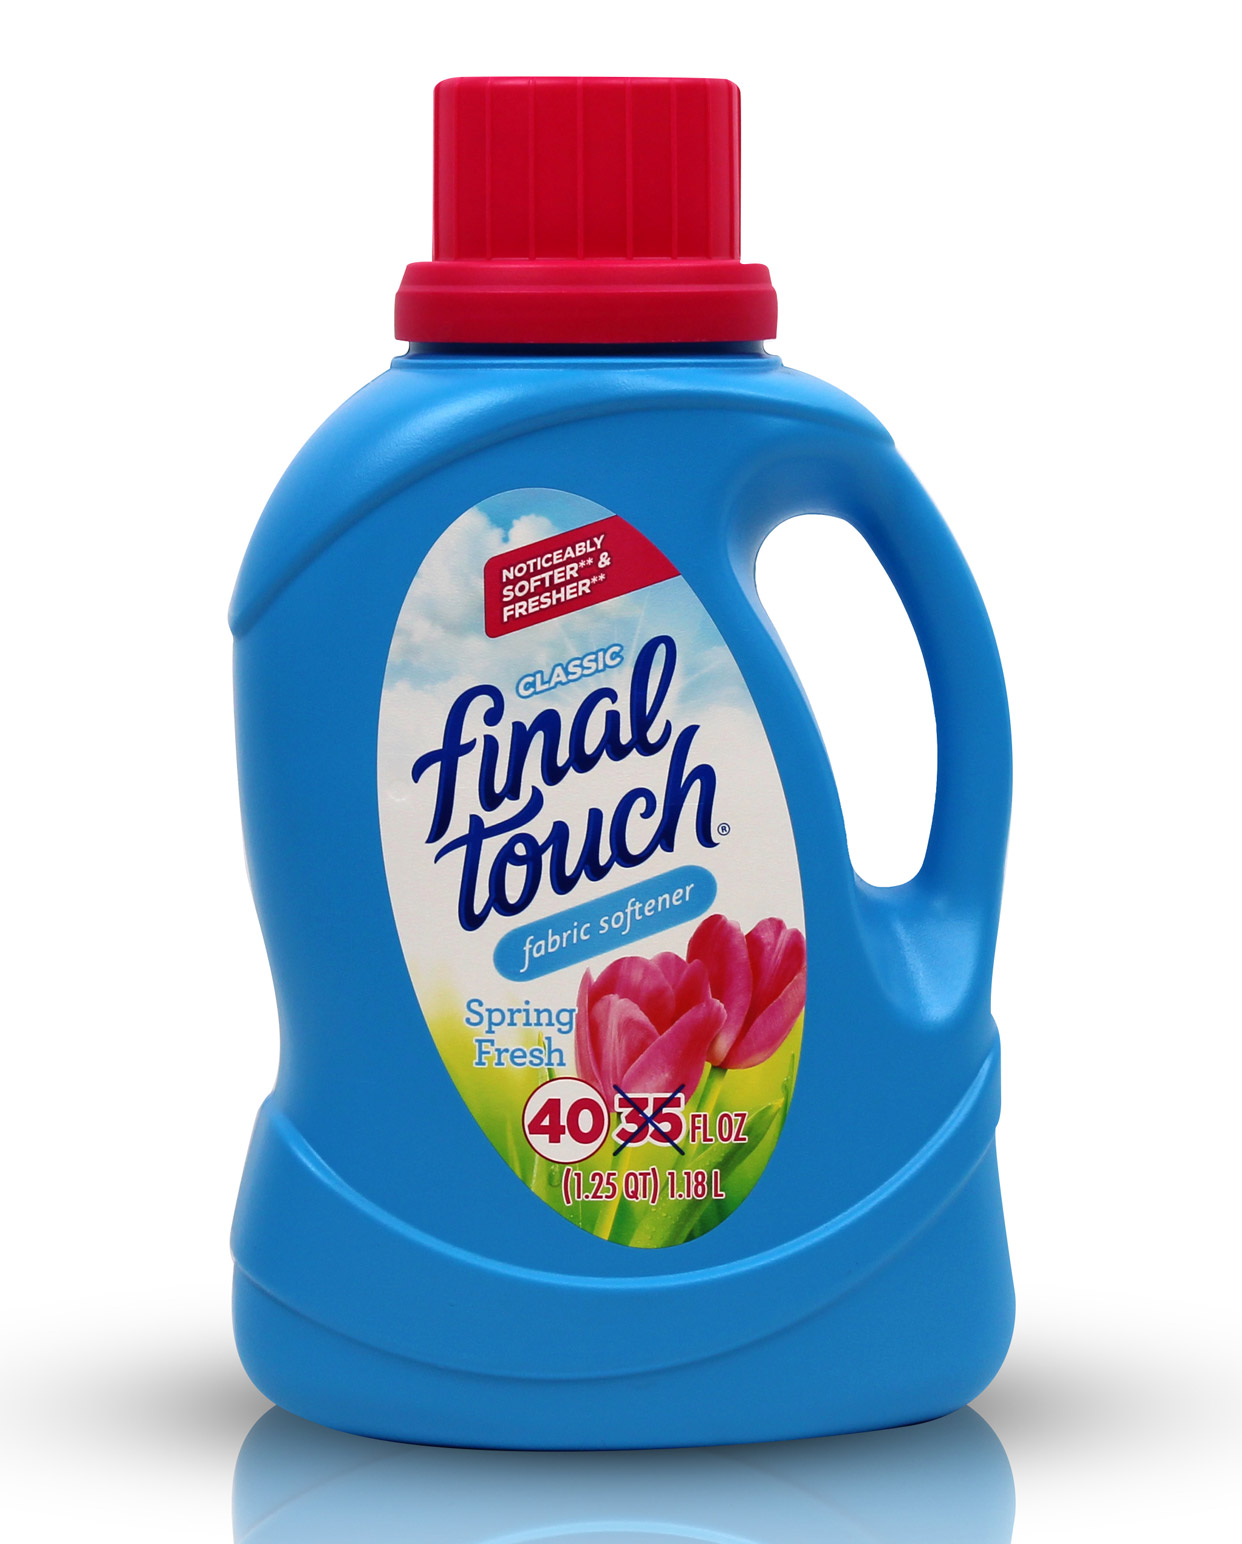 130oz bottle of Liquid Fabric Softener with Spring Fresh Scent.